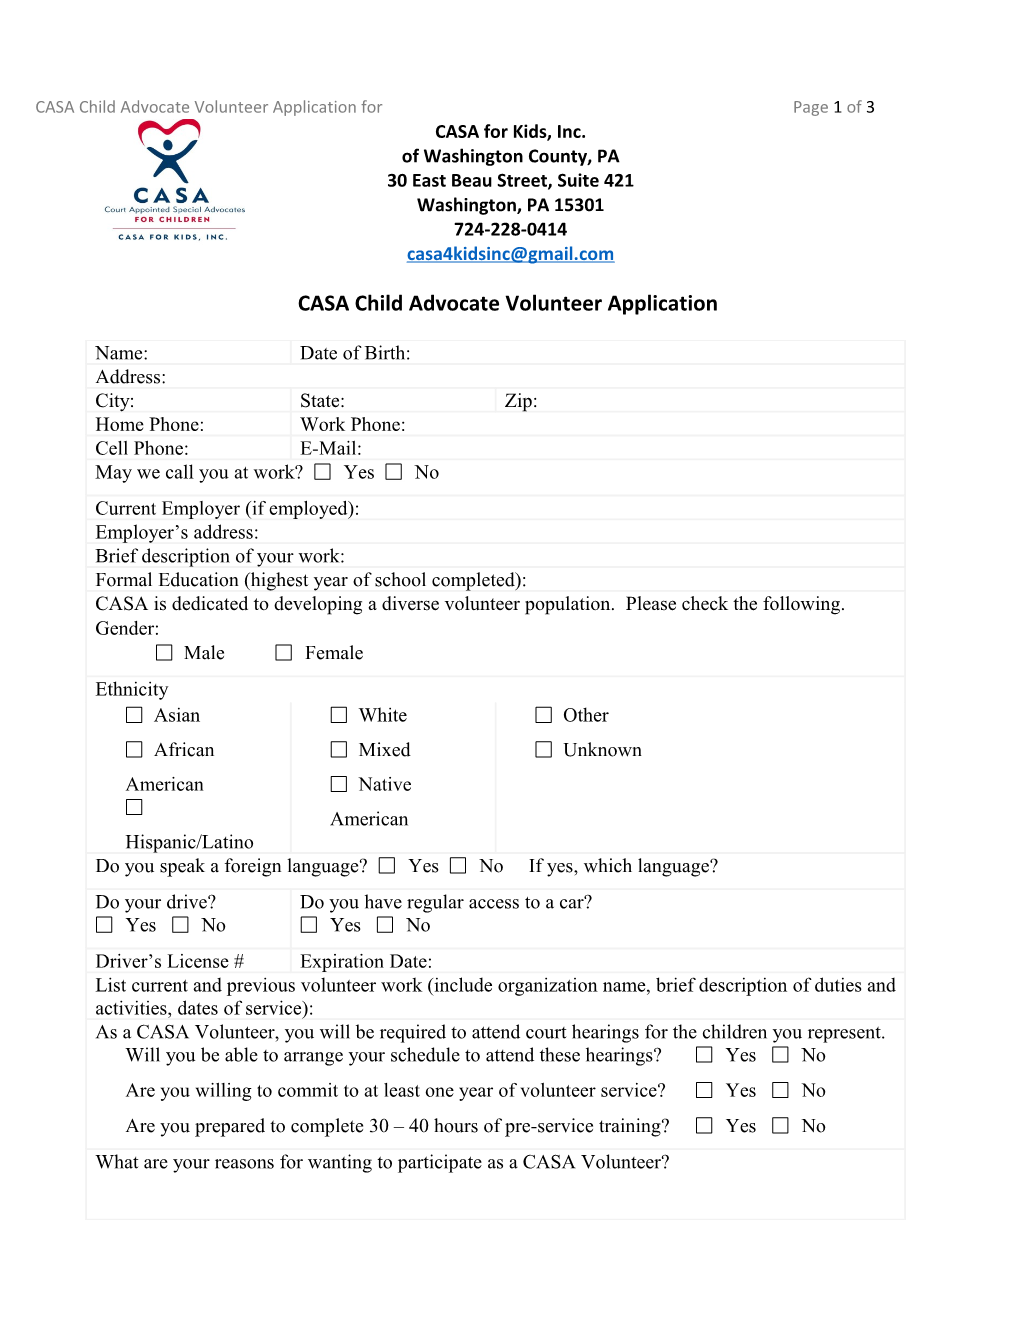 CASA Child Advocate Volunteer Application for Formtextpage 1 of 3